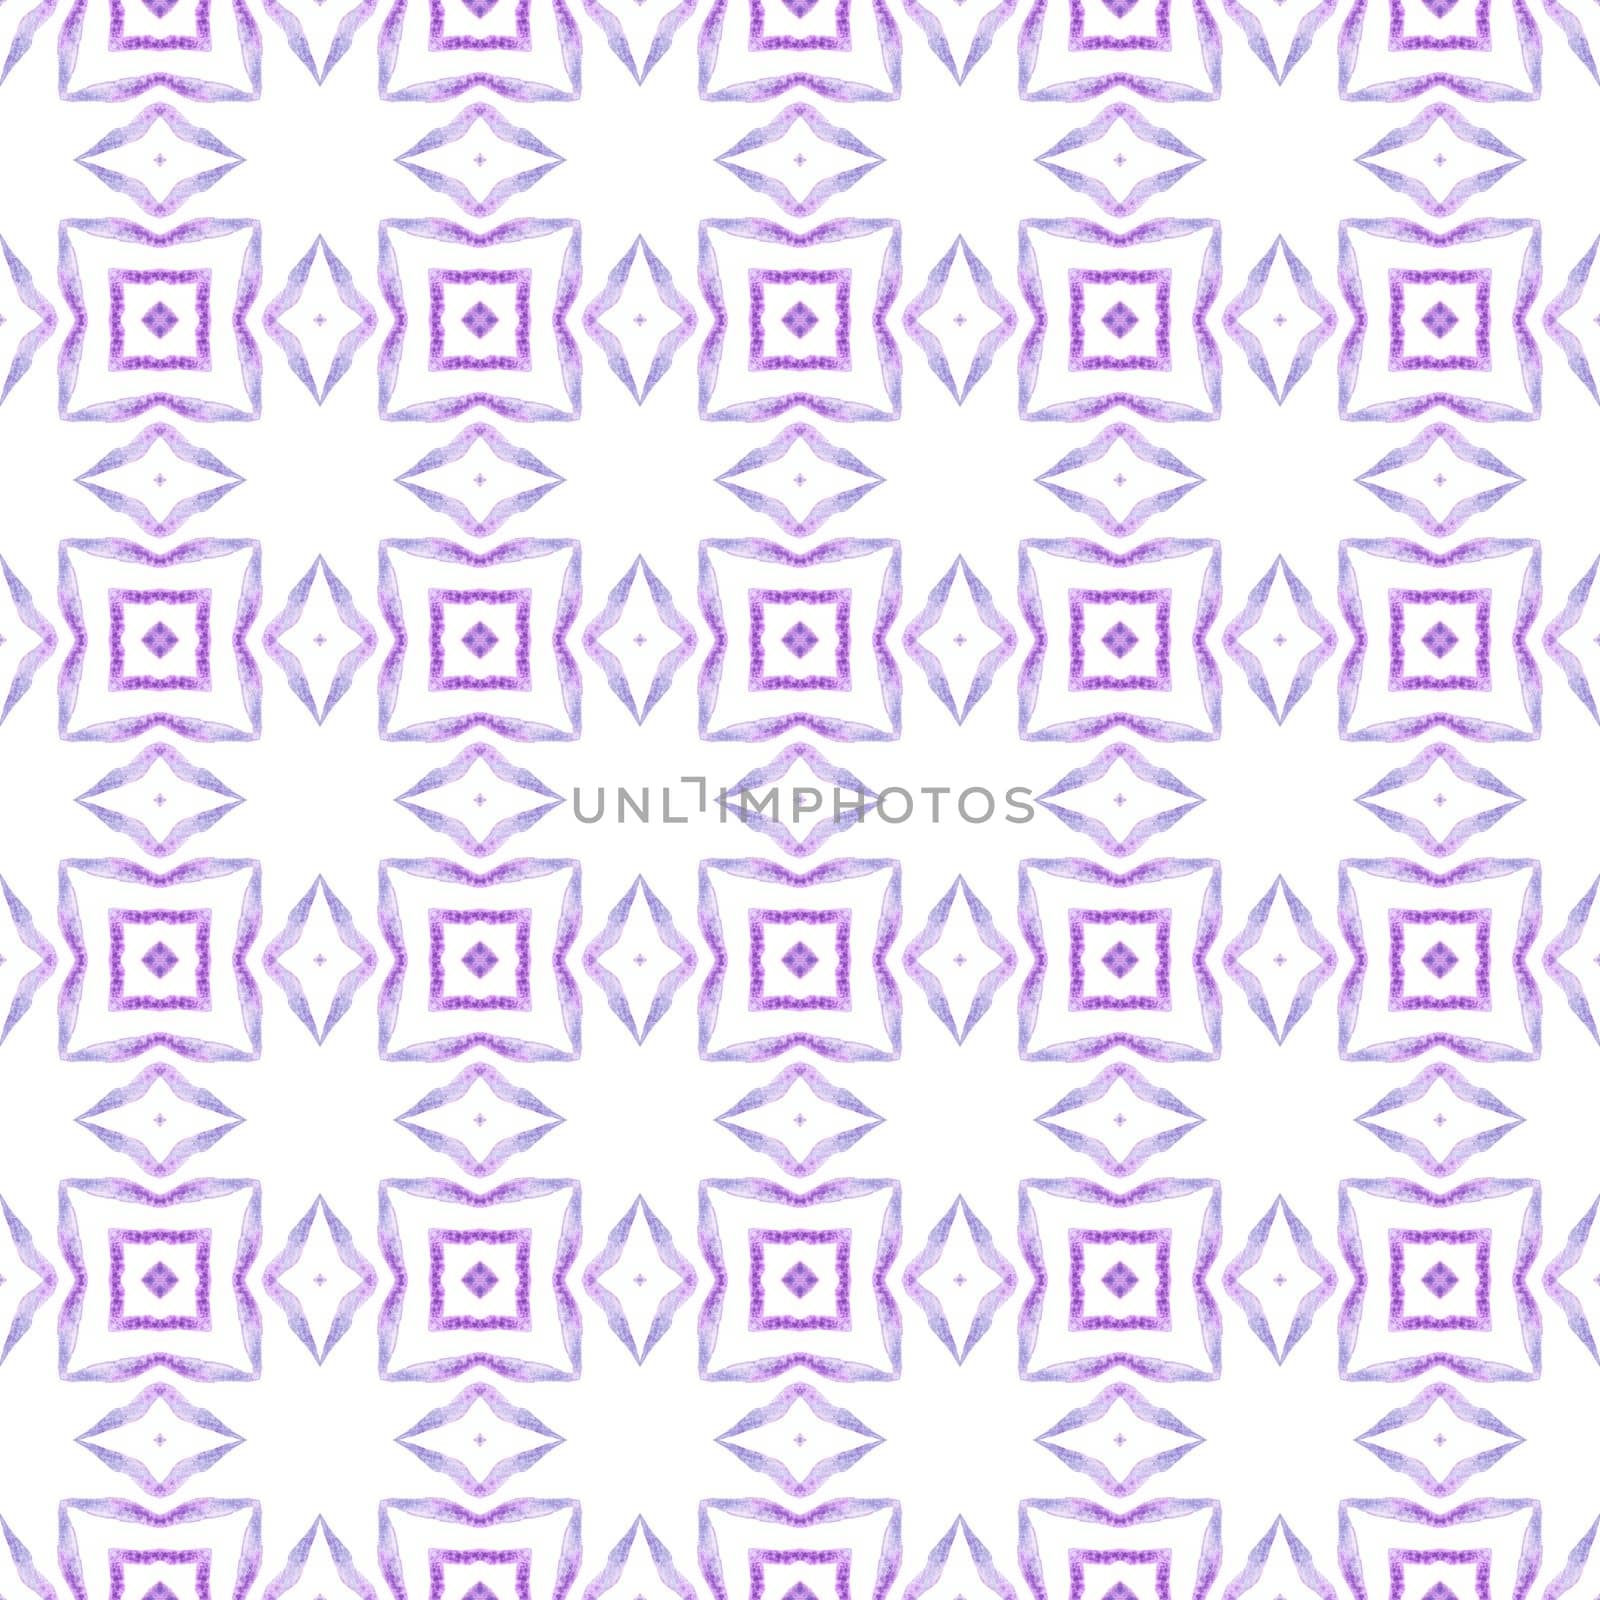 Watercolor ikat repeating tile border. Purple exceptional boho chic summer design. Textile ready marvelous print, swimwear fabric, wallpaper, wrapping. Ikat repeating swimwear design.